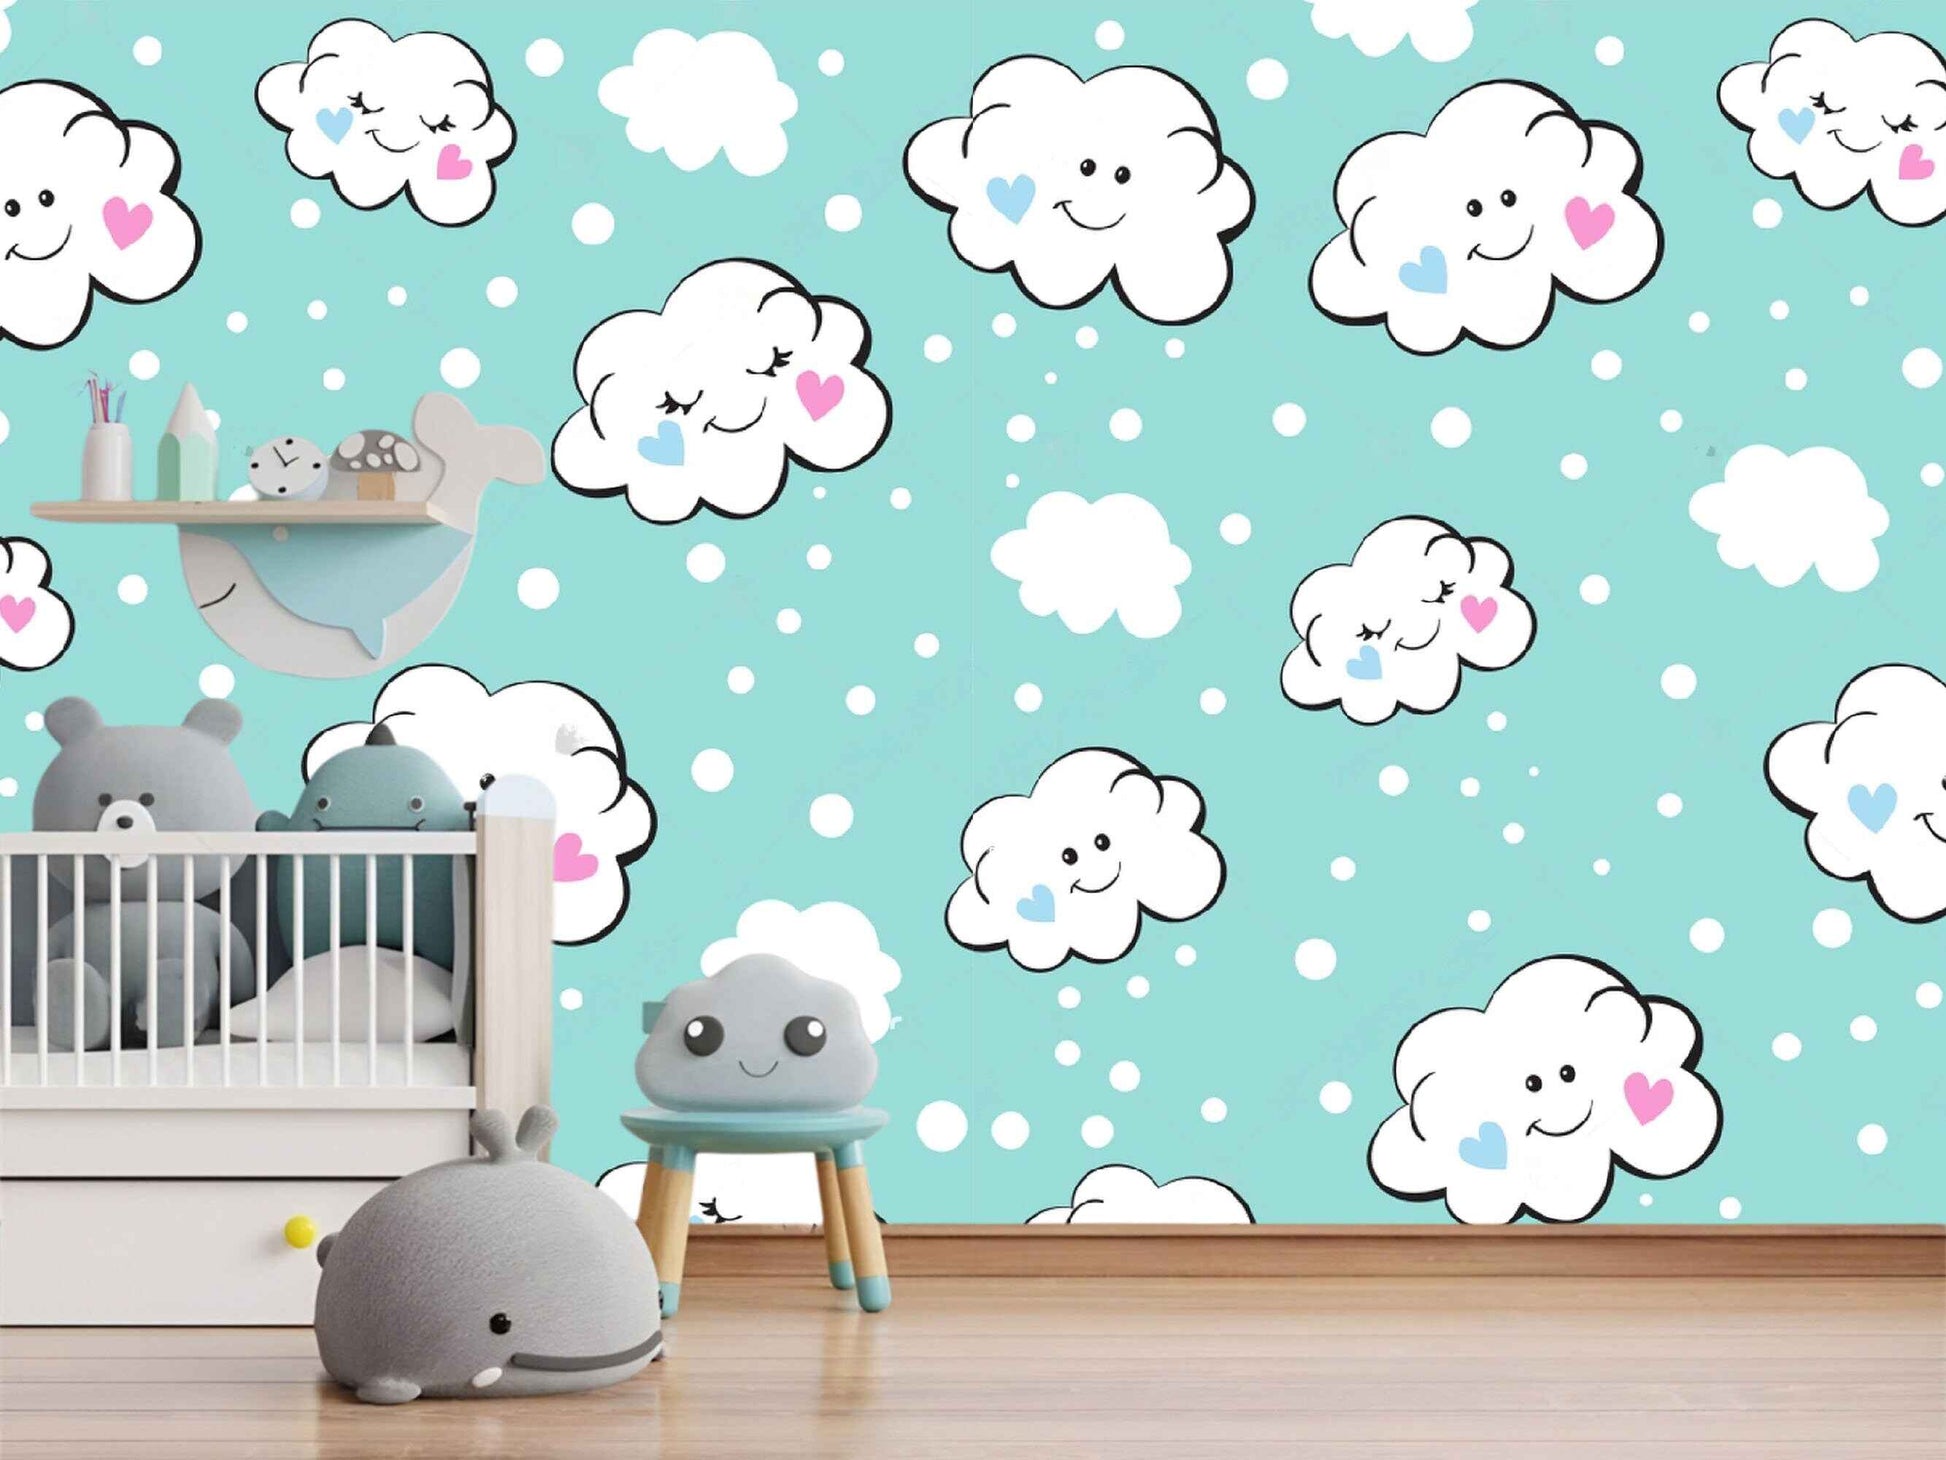 Playful clouds wall art in a kids' room, inspiring imagination and creativity.